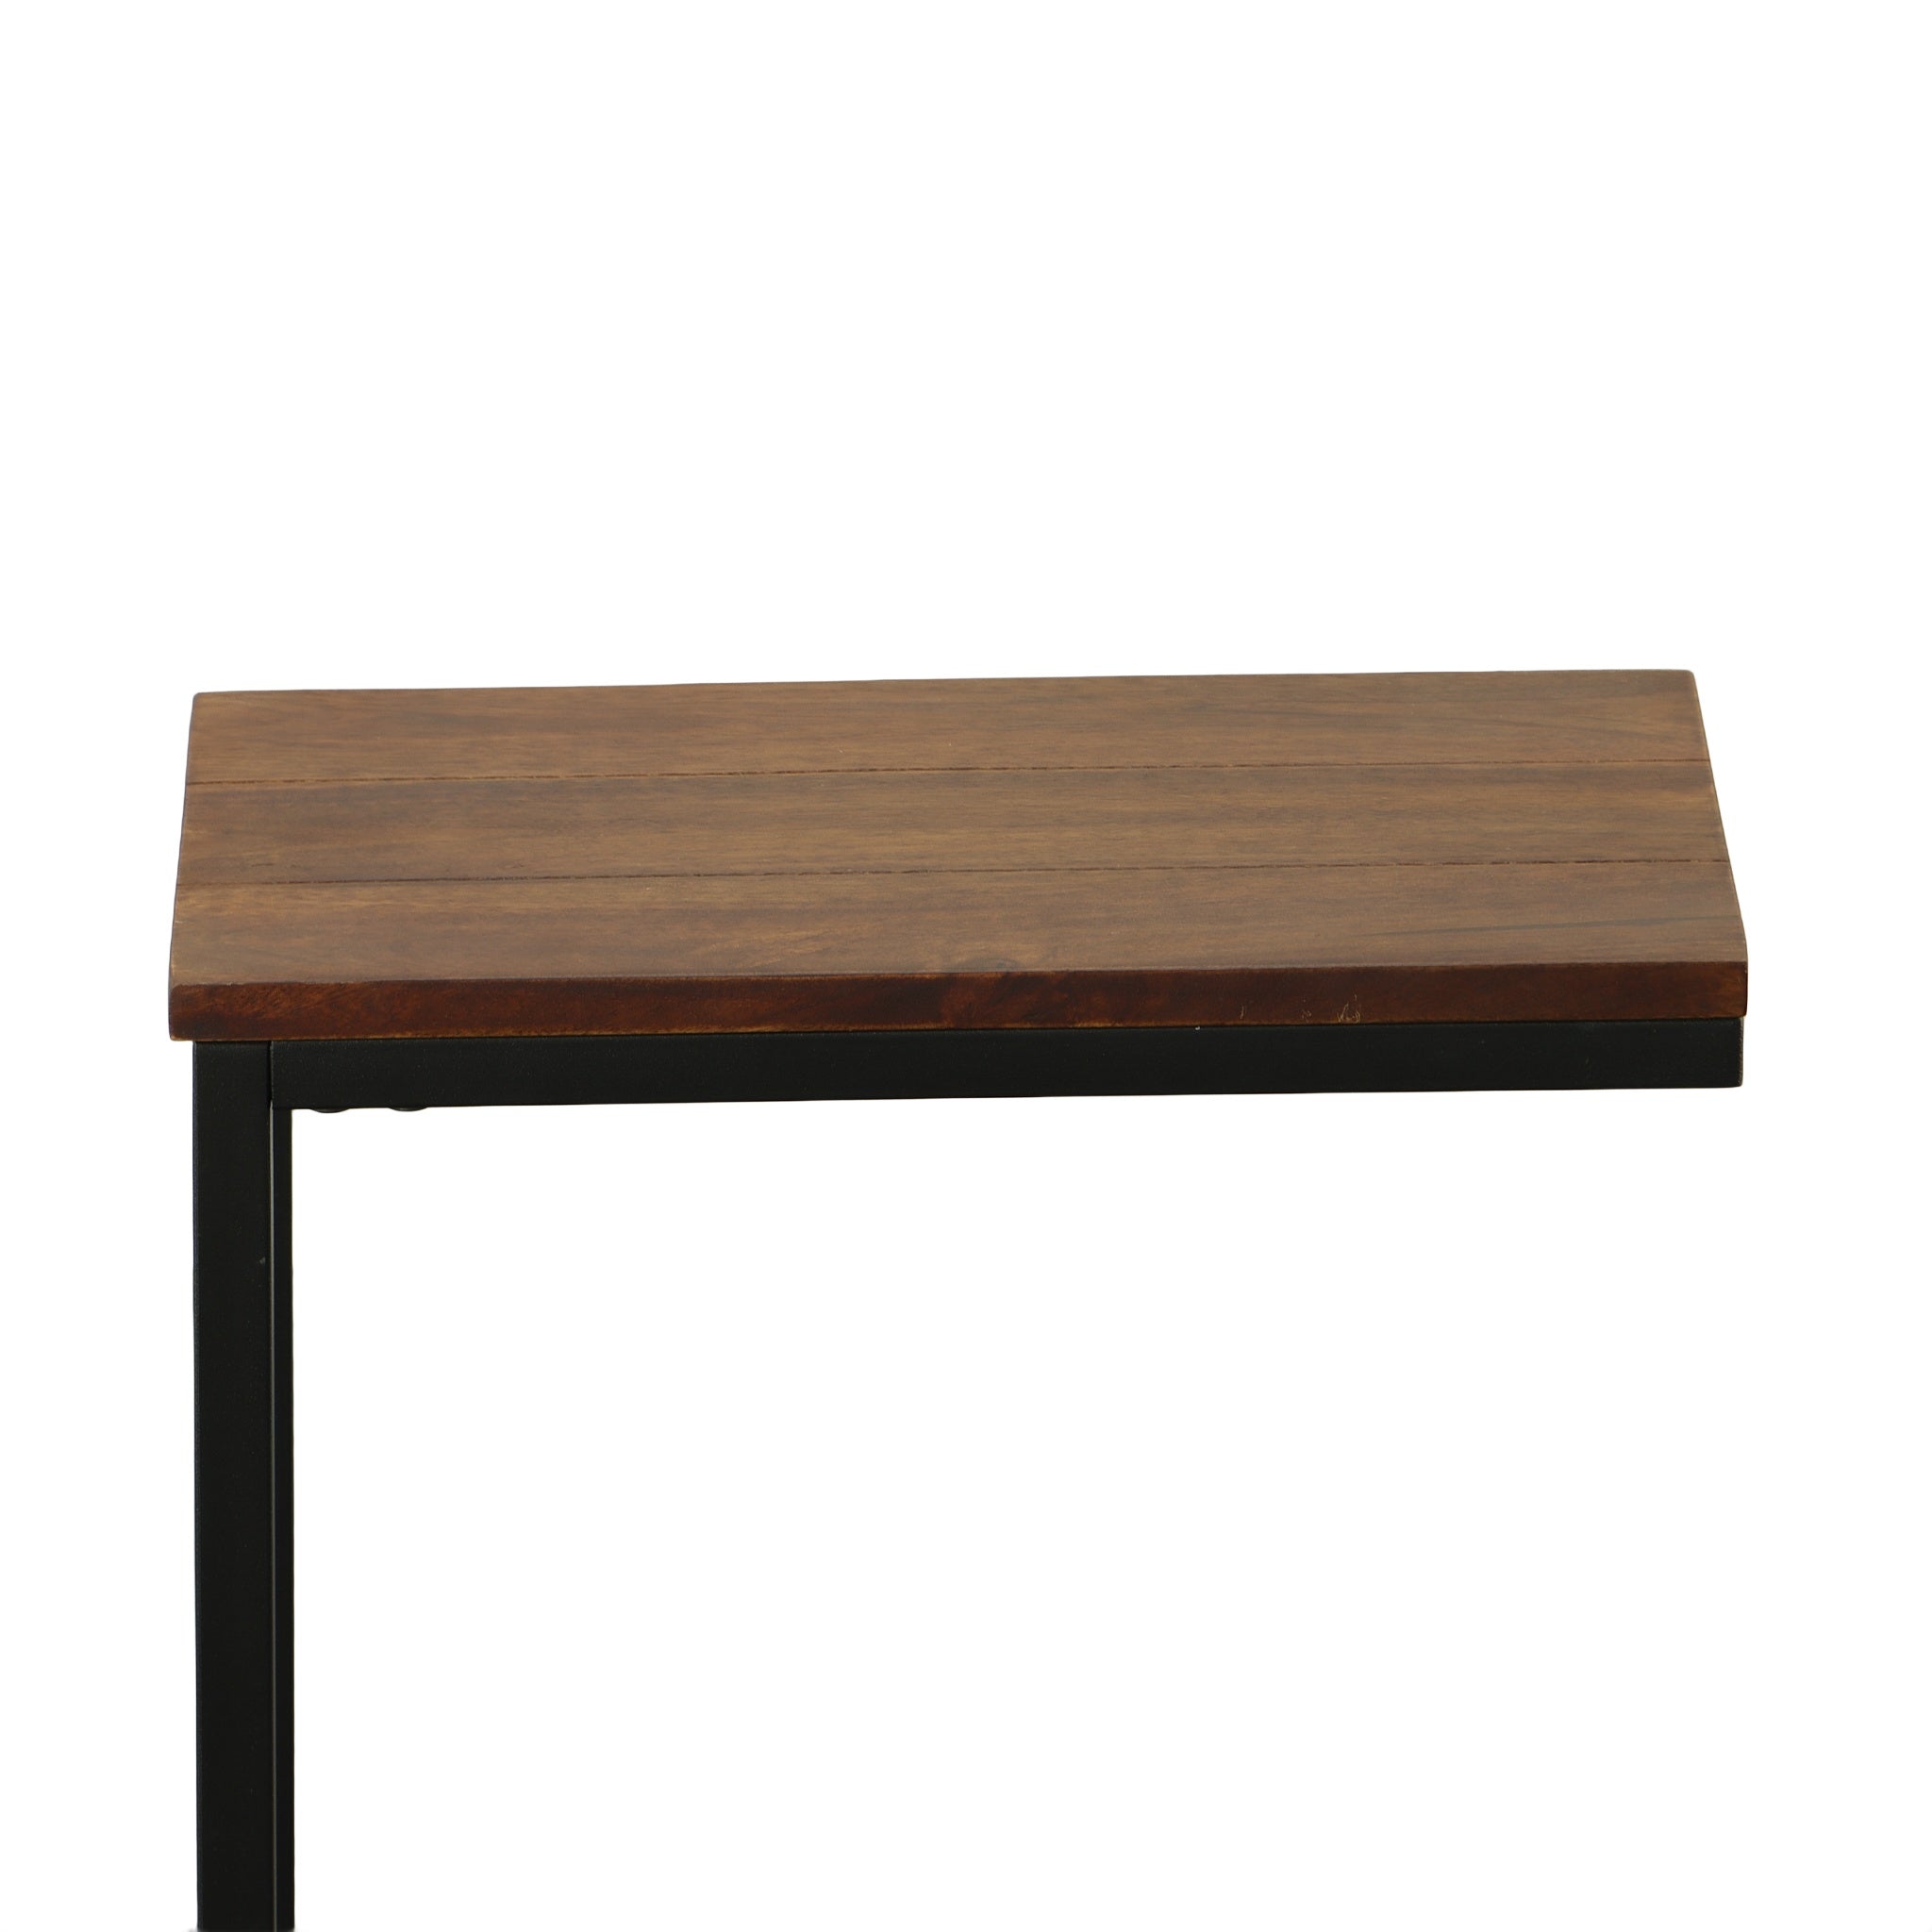 Aggie C-Form Accent Table - Side Tables